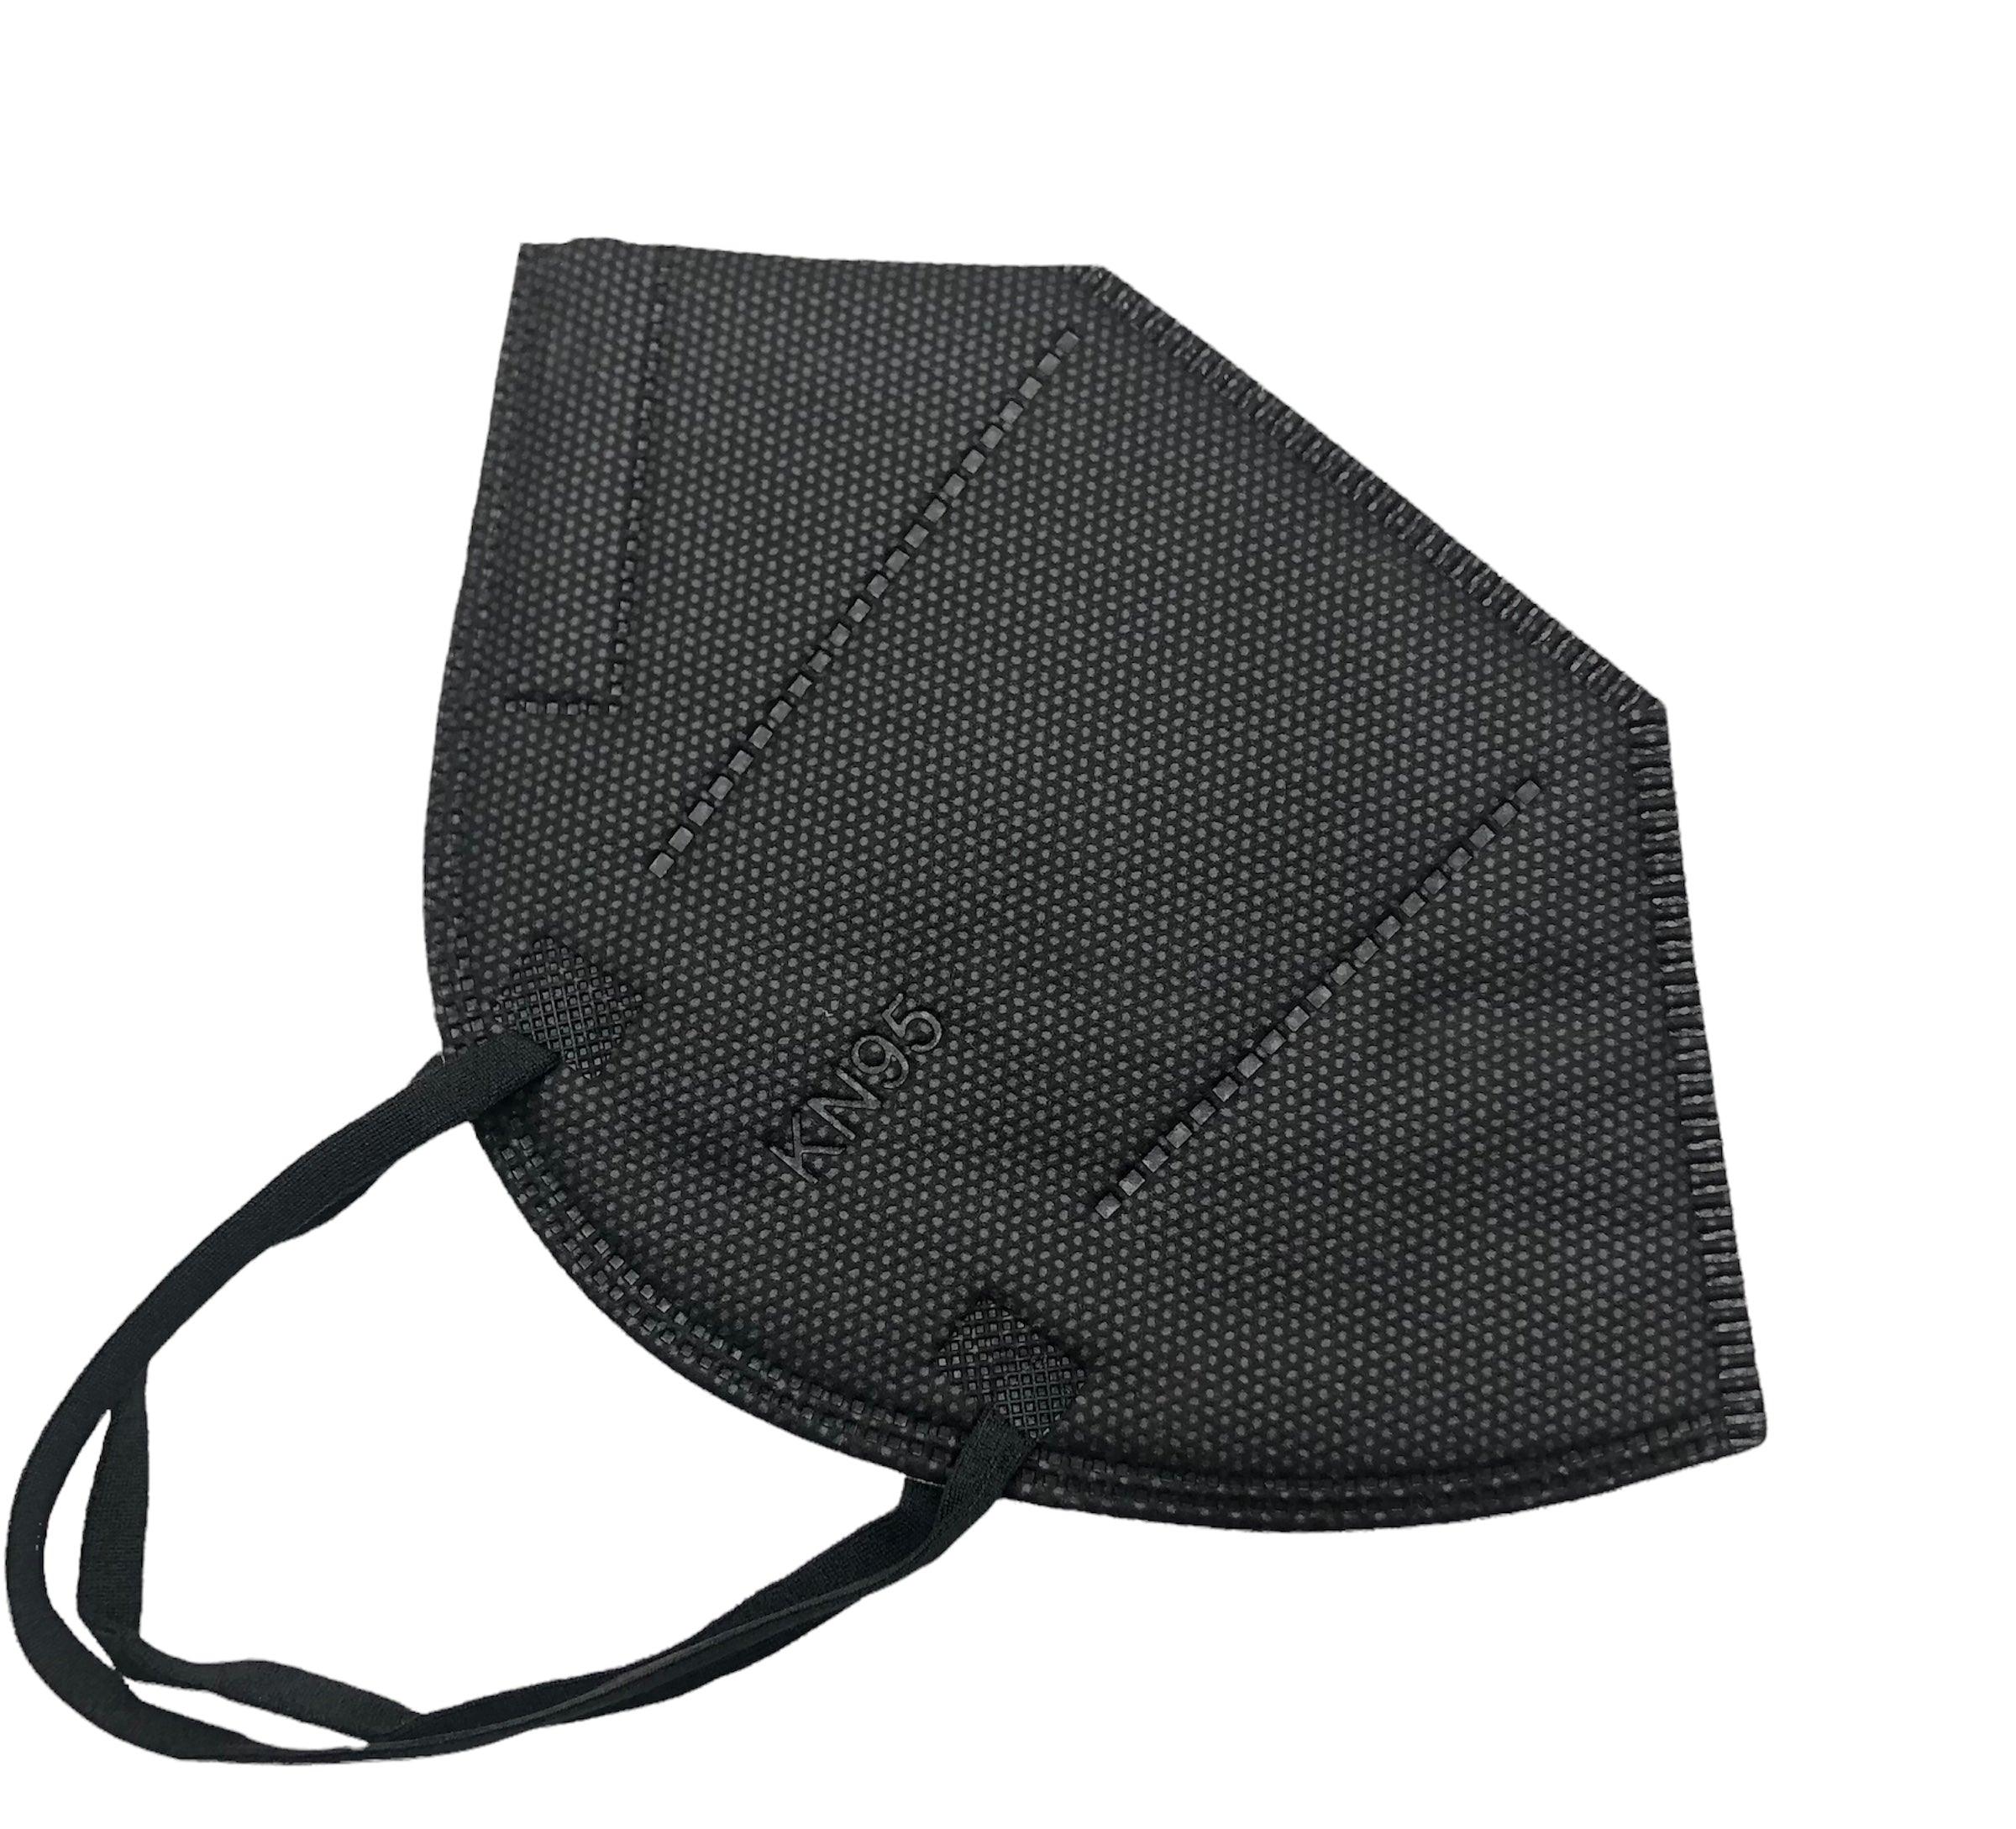 Black KN95 Protective Face Mask